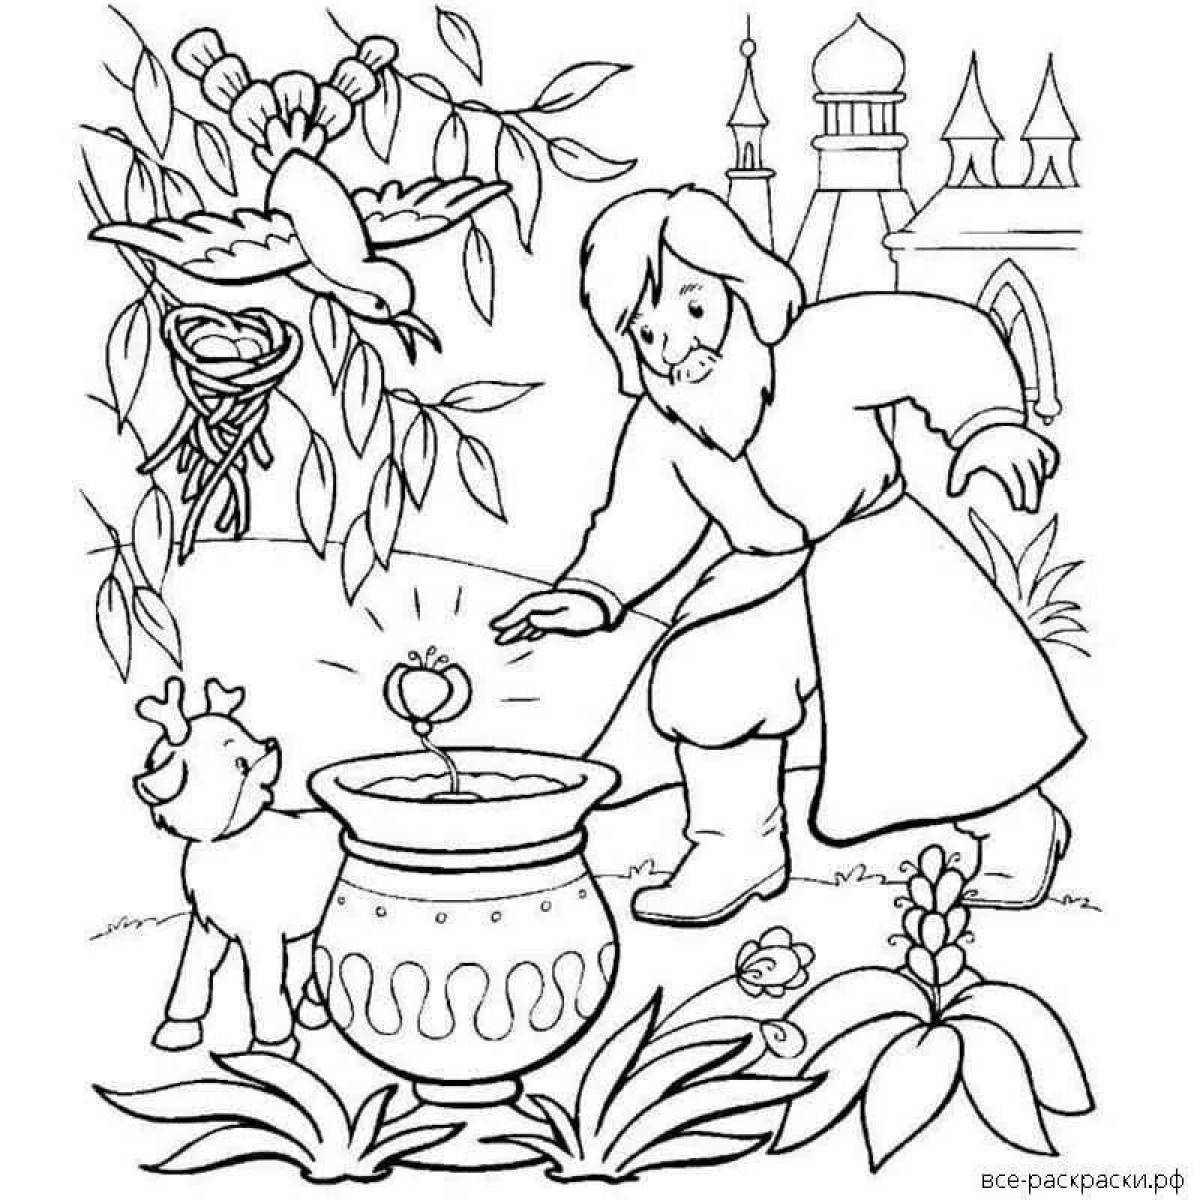 Adorable scarlet flower coloring page